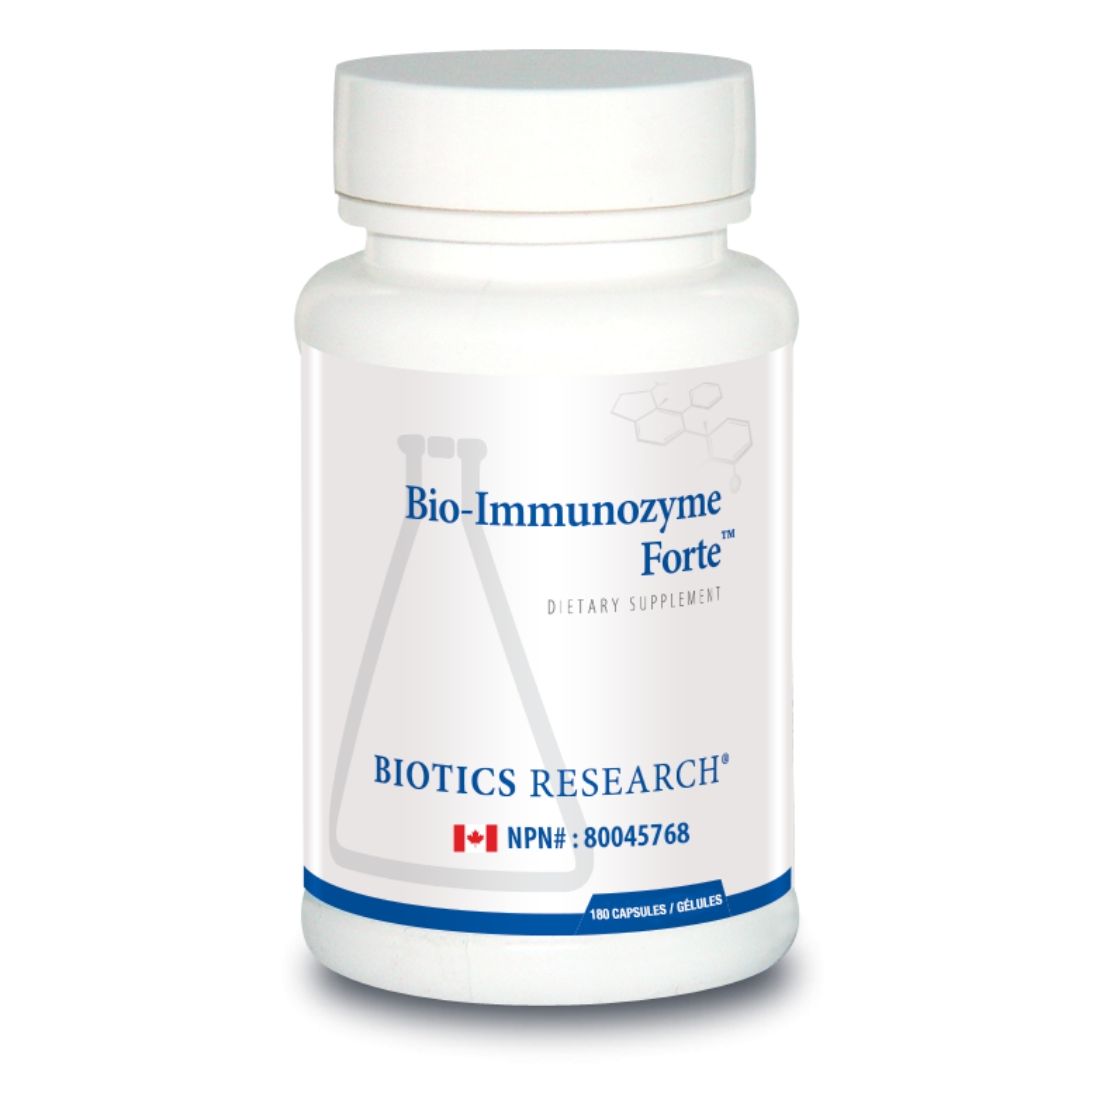 Biotics Research Bio-Immunozyme Forte (May help activate AMPK), 90 Tablets